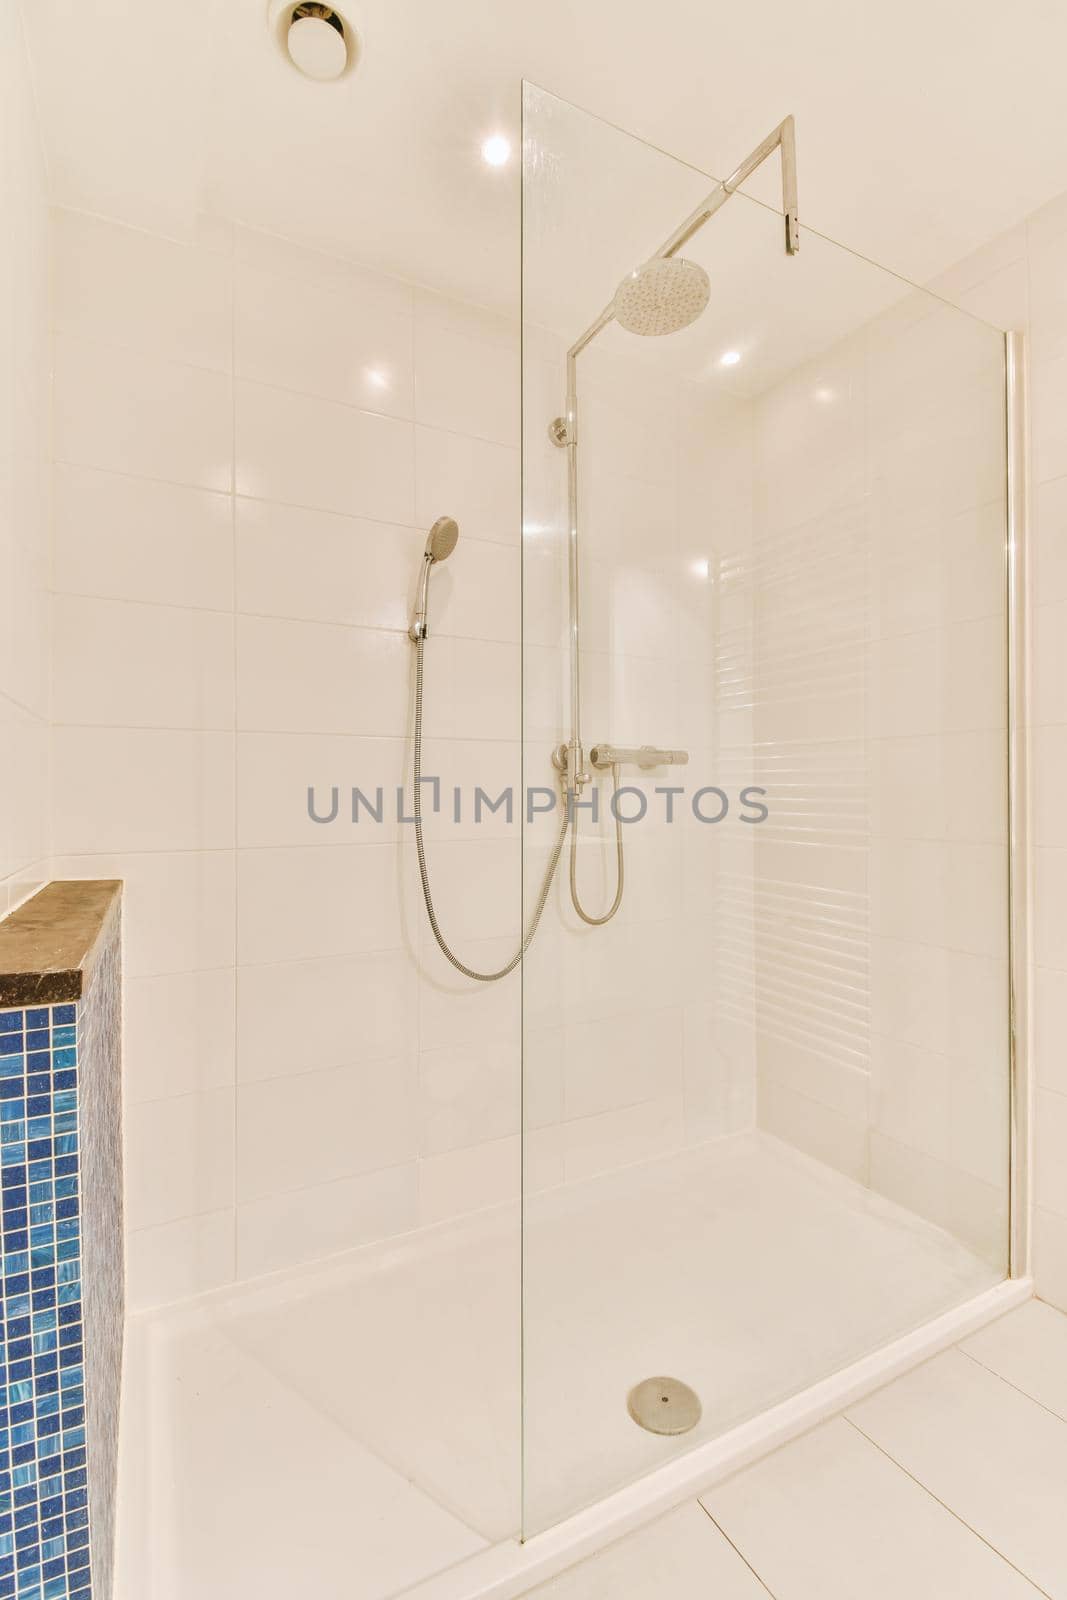 The interior of a spacious modern bathroom in a cozy residential apartment with a glazed shower cabin